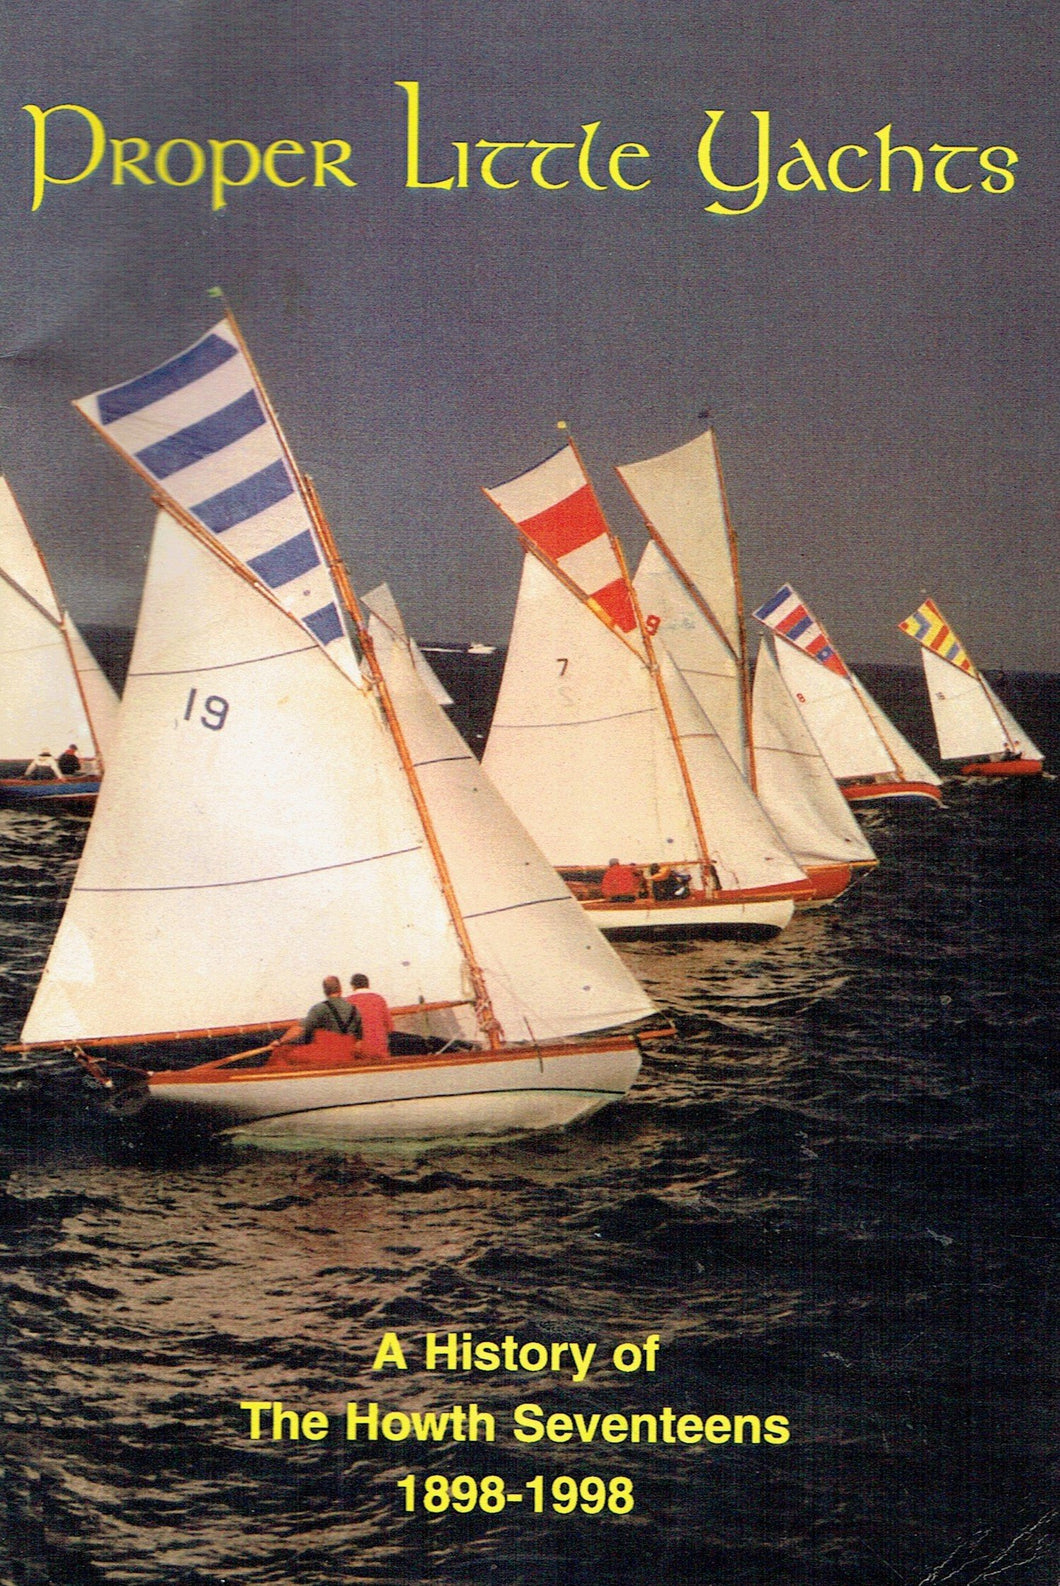 Proper Little Yachts: A History of the Howth Seventeens, 1898-1998